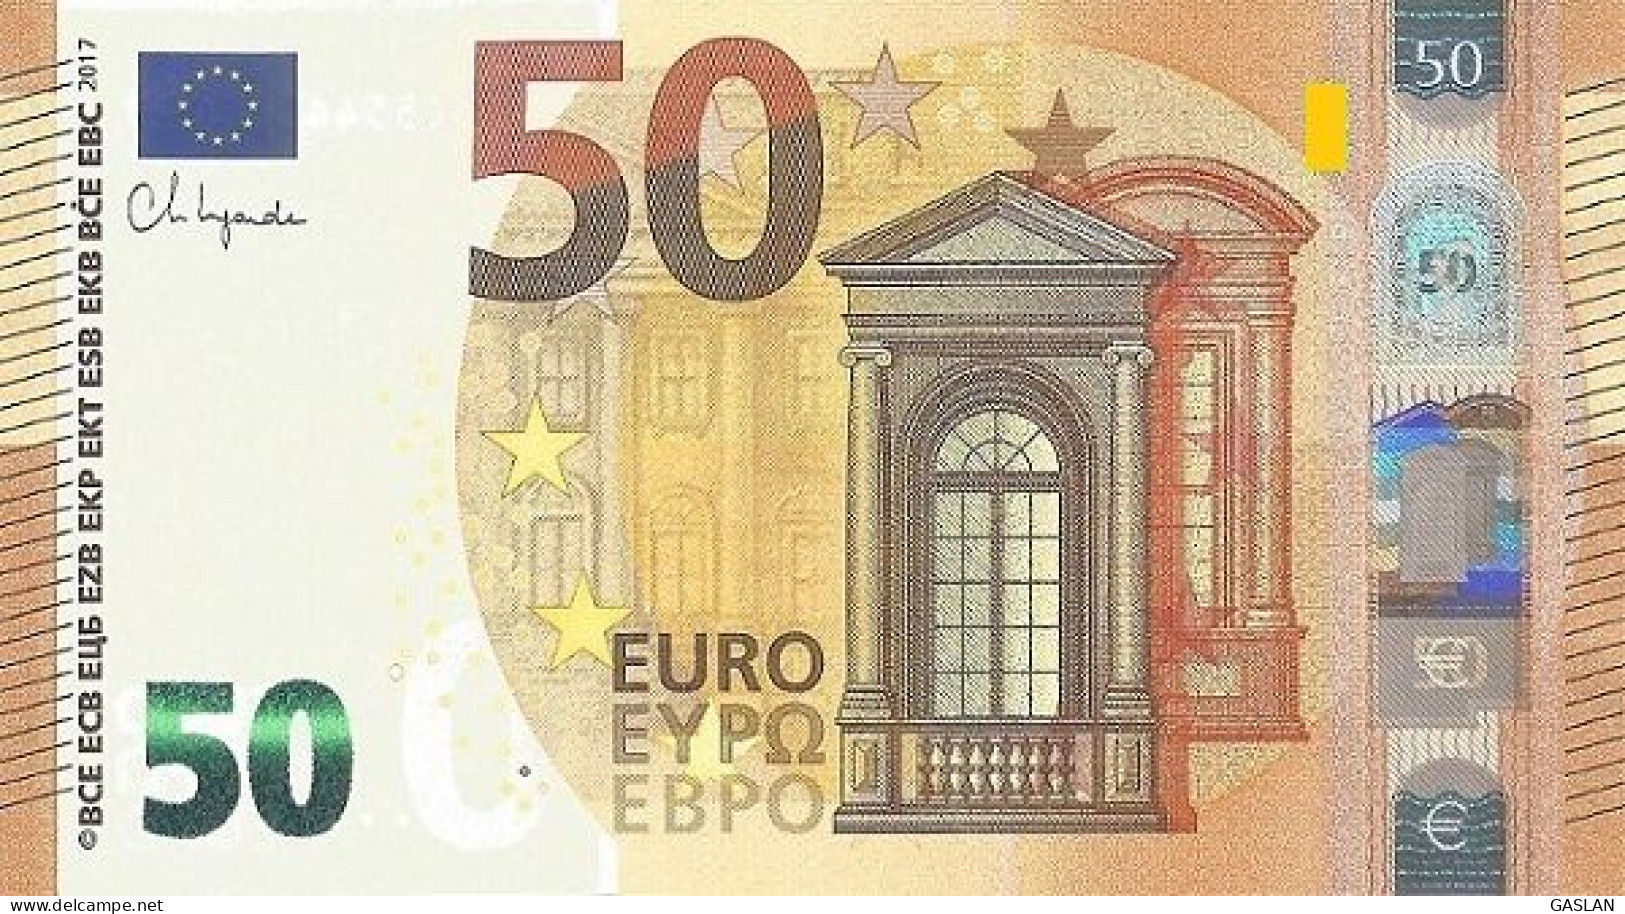 FRANCE 50 U028 U029 U030 U031 U032 U033 U035 U036 U037 U038 UNC LAGARDE UA UB UC UD ONLY ONE CODE - 50 Euro